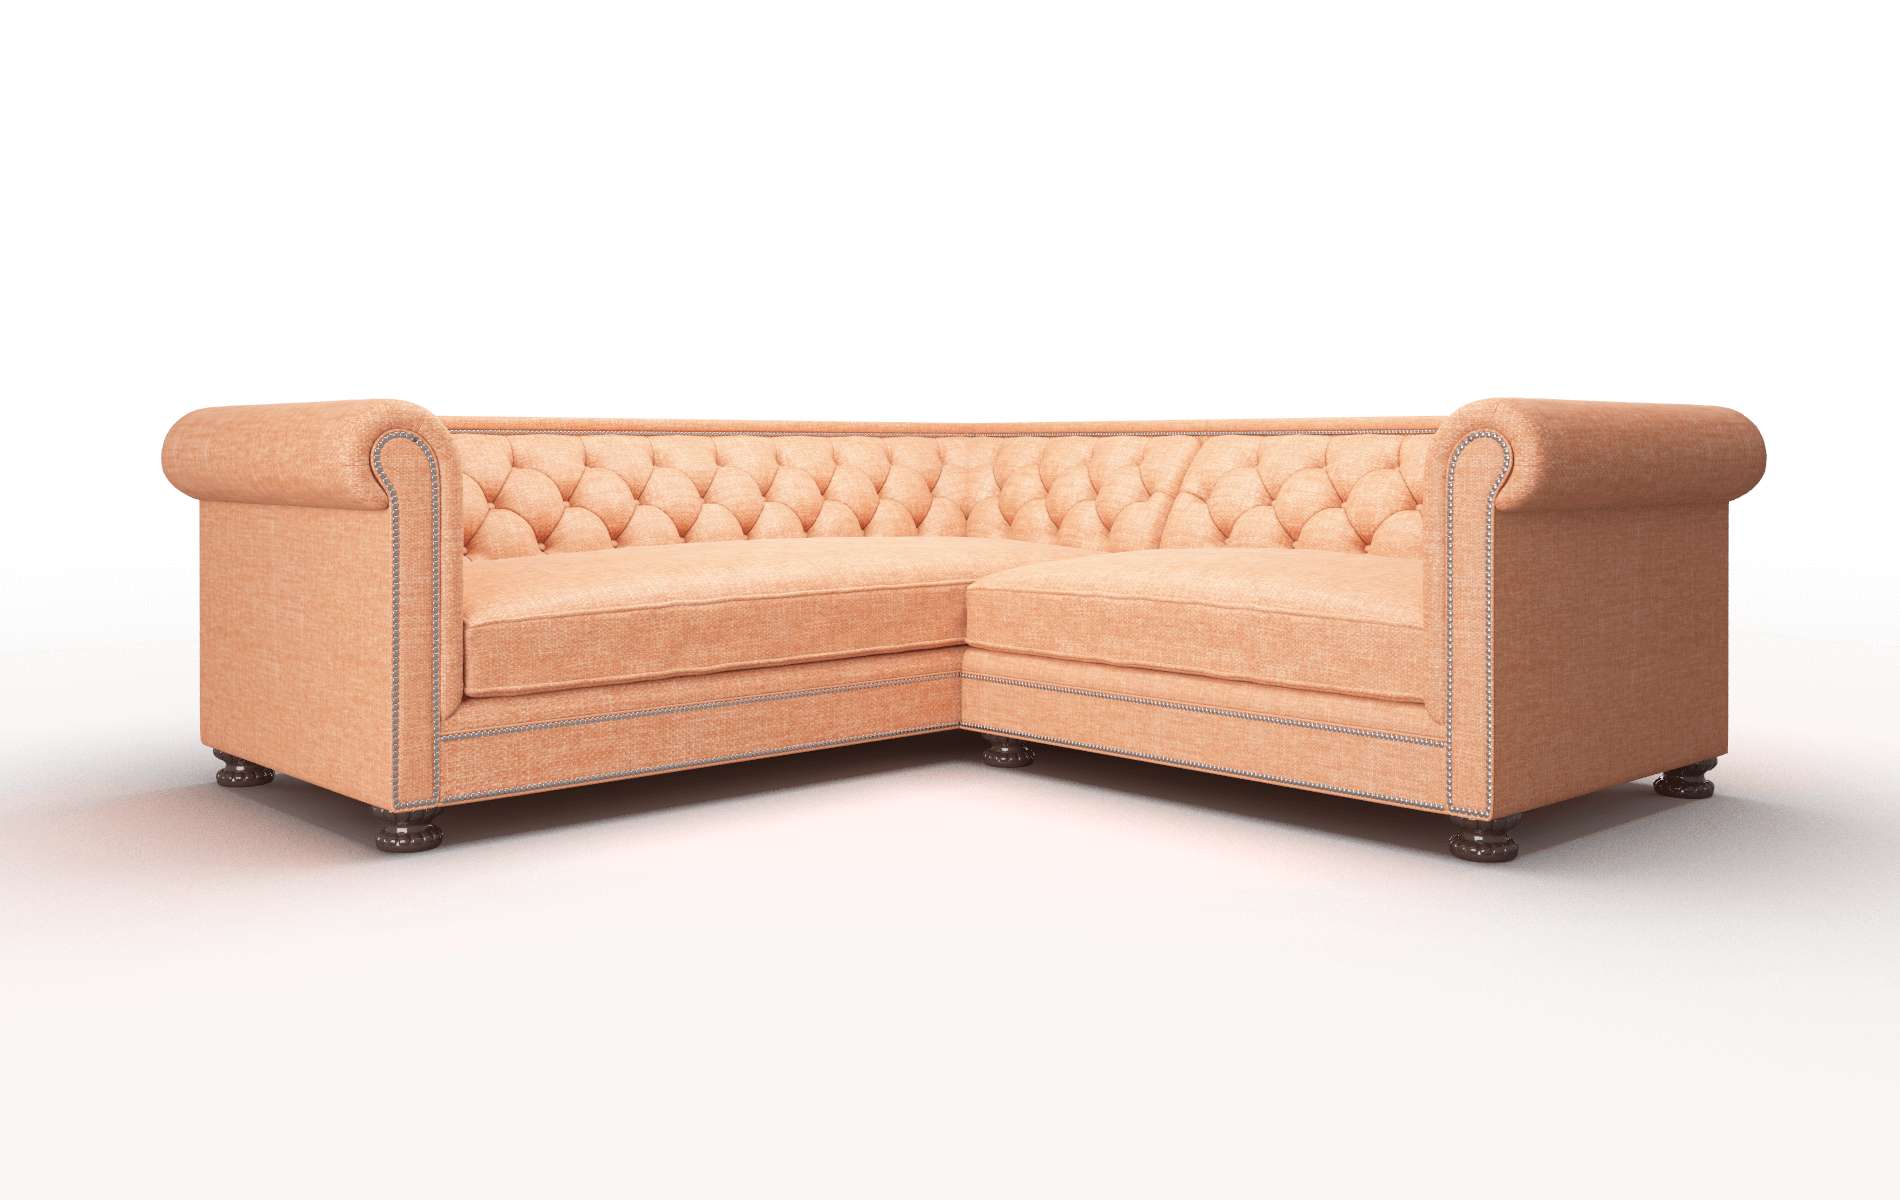 Athens Hepburn Appricot Sectional espresso legs